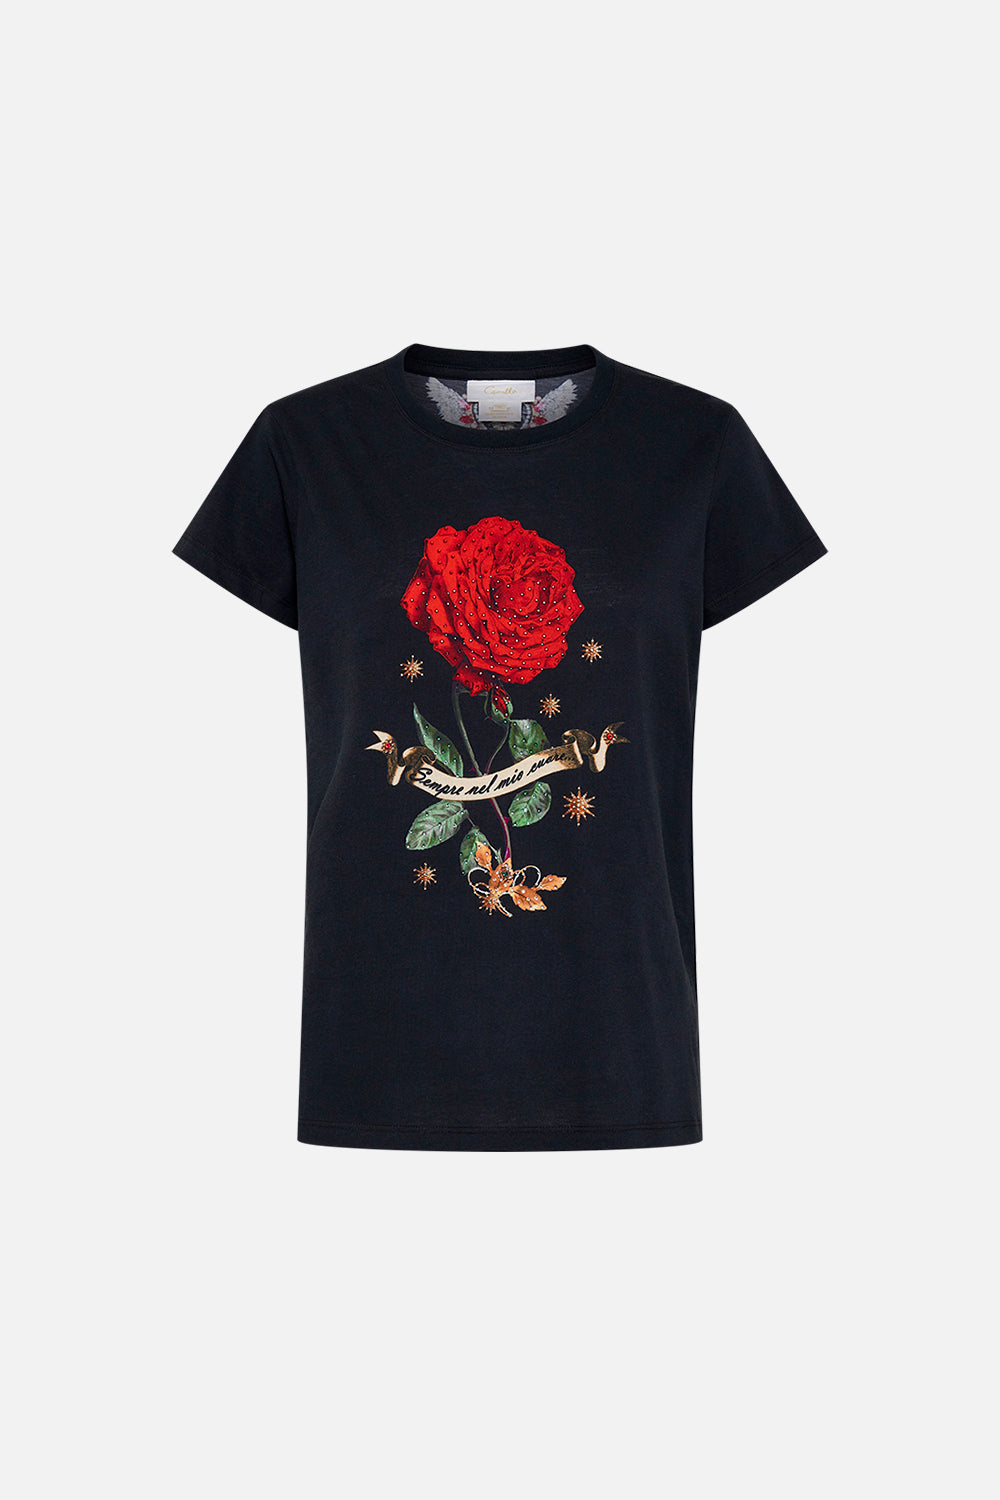 CAMILLA women t shirt in Reservation For Love print